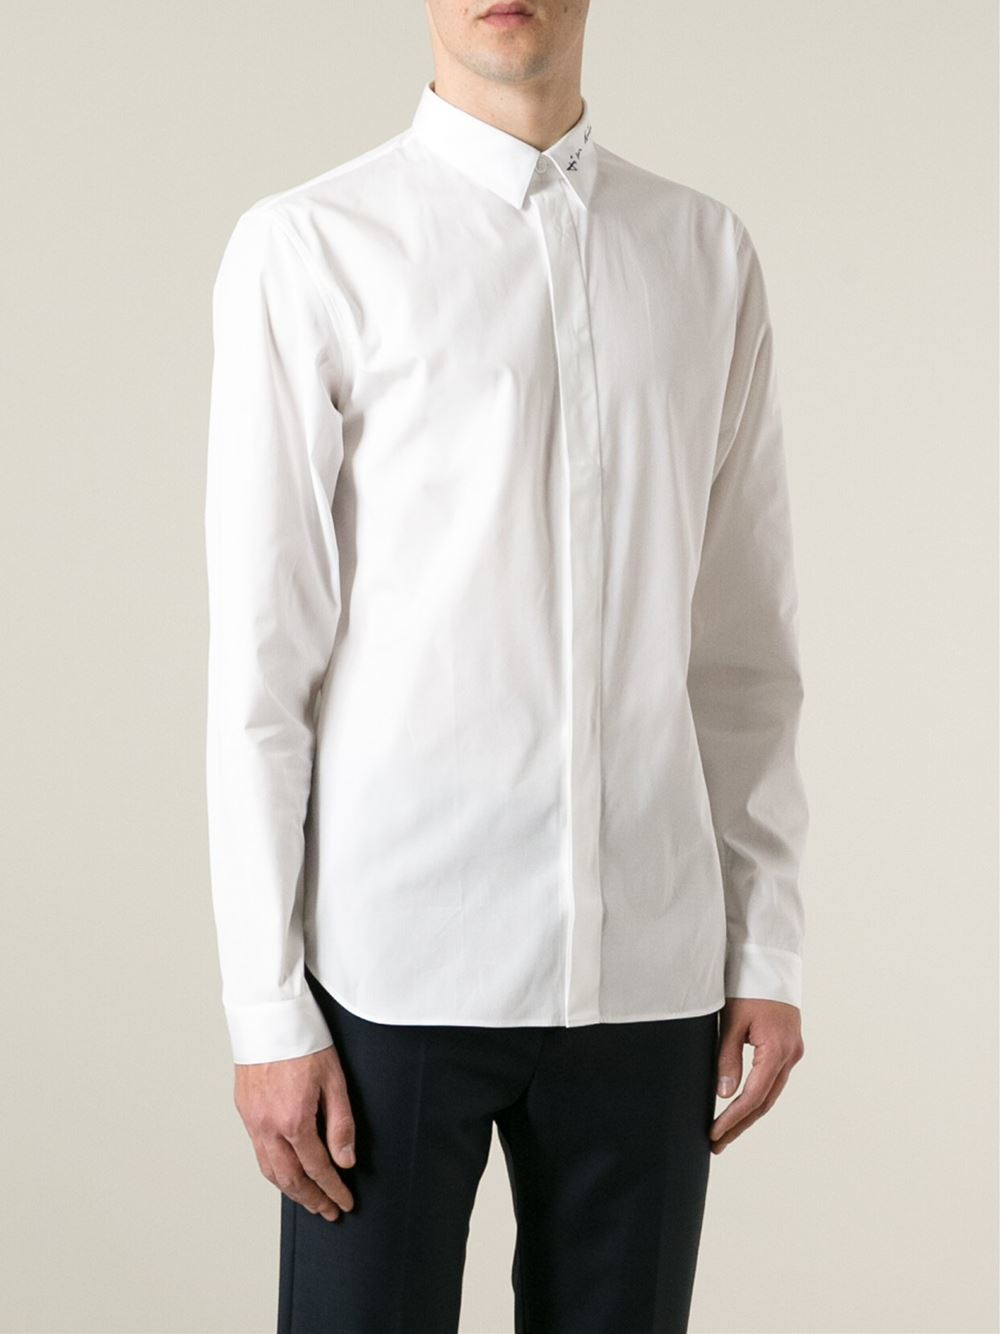 Dior Homme Embroidered Collar Shirt in White for Men - Lyst